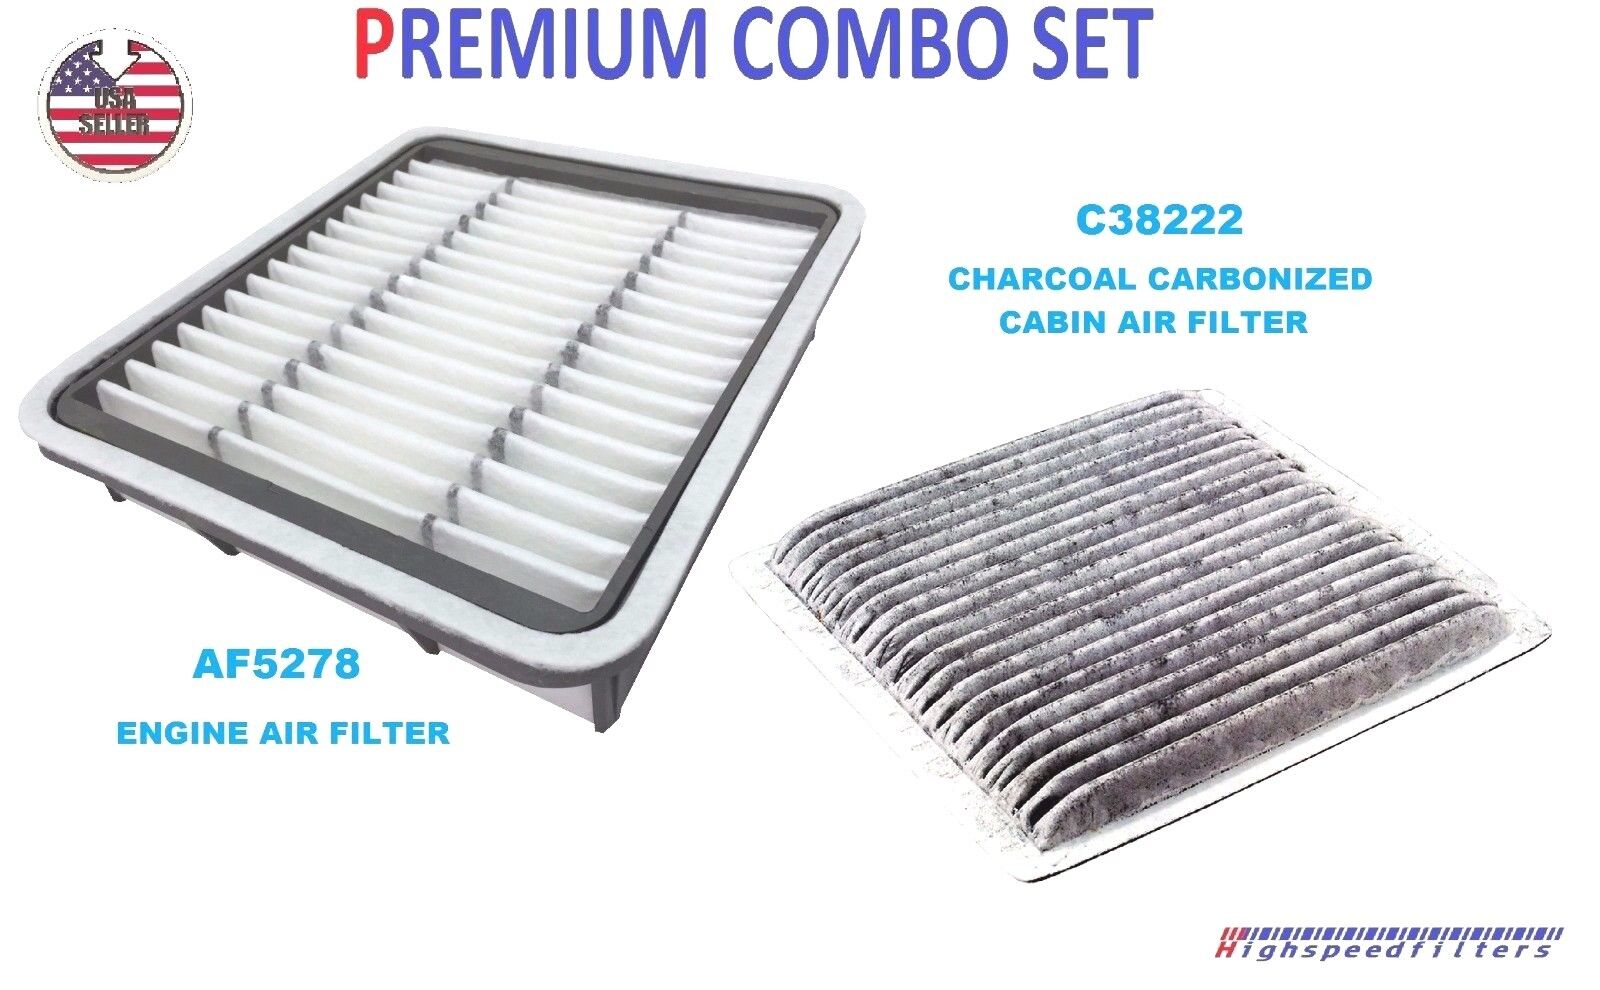 COMBO Air Filter & CHARCOAL Cabin Air Filter for 01-05 LEXUS IS300 AF5278 C38222